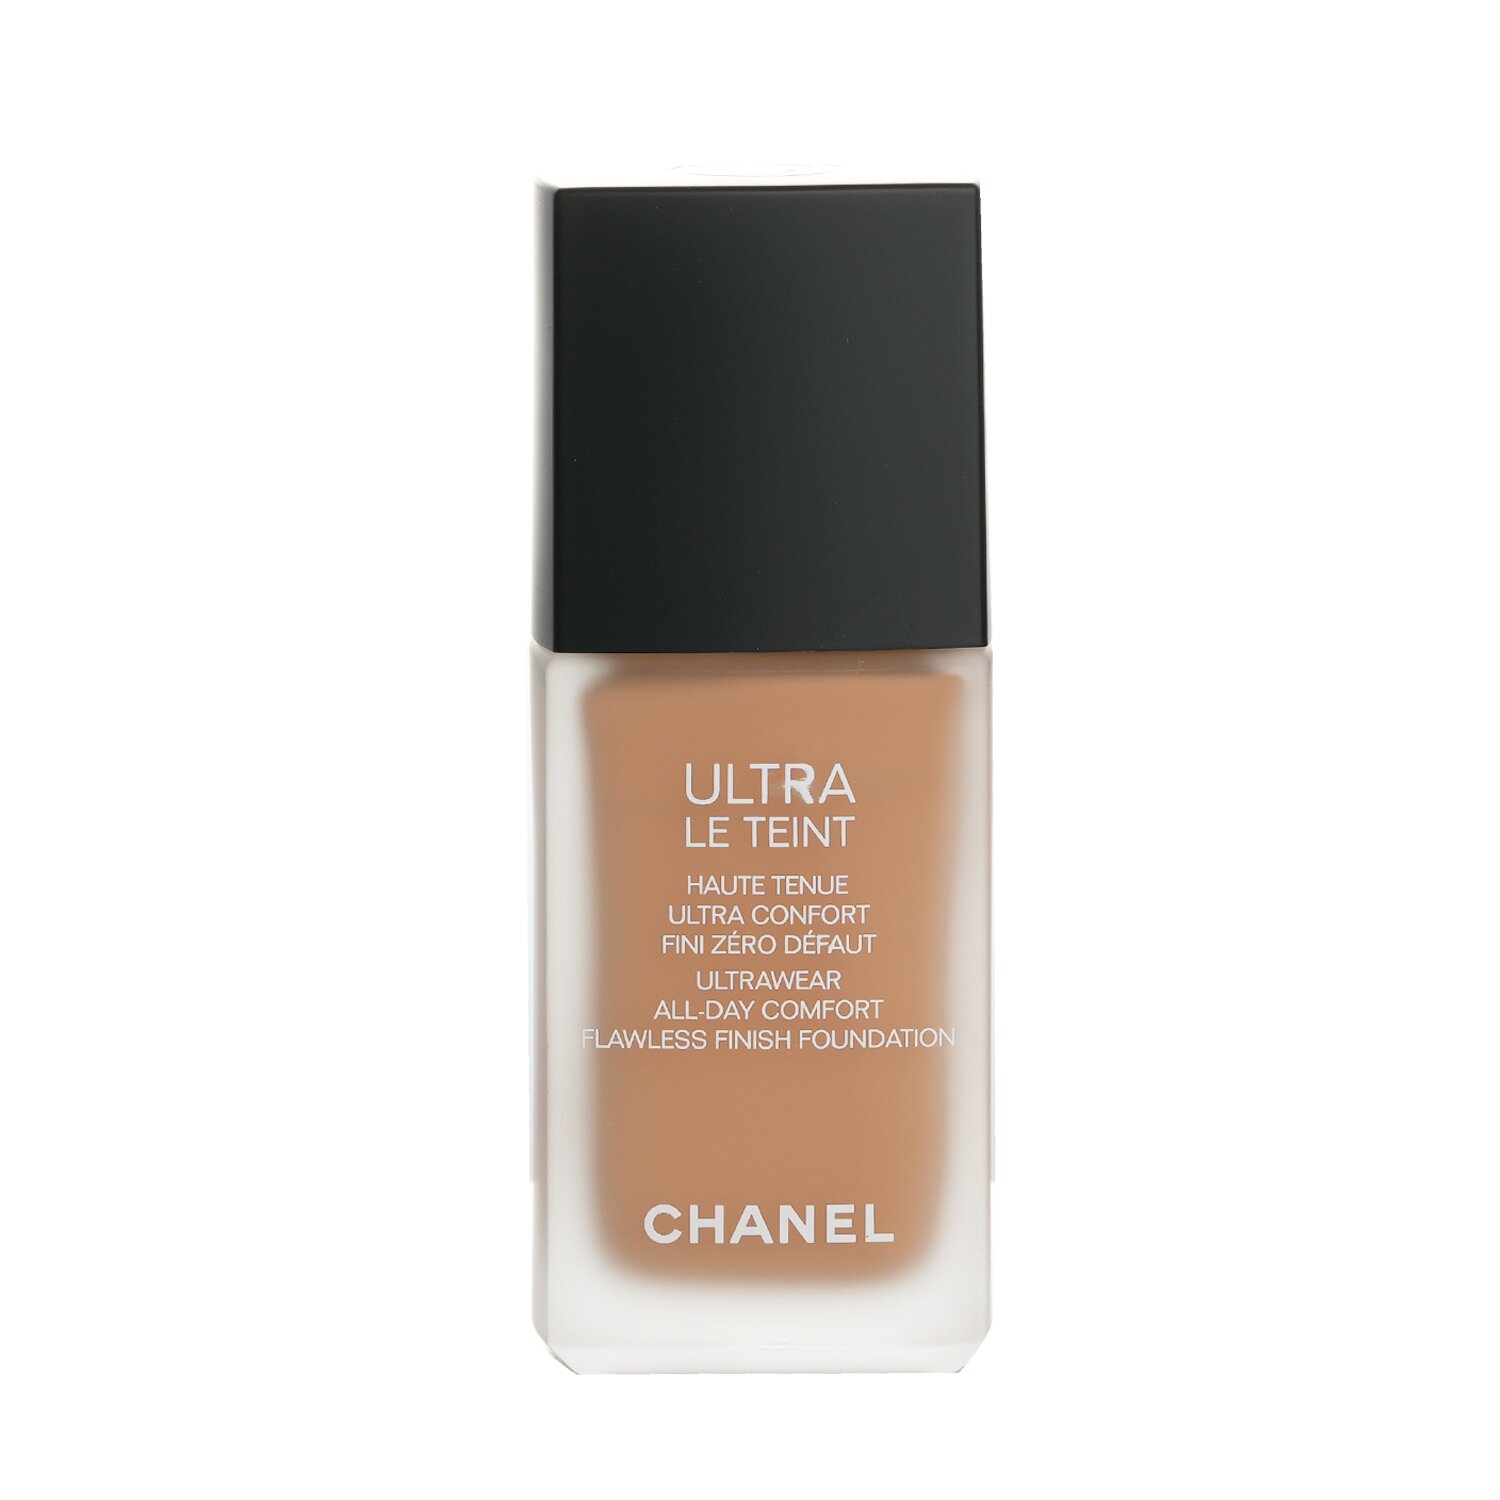 CHANEL ULTRA LE TEINT Ultrawear All Day Comfort Flawless Finish Foundation, Nordstrom